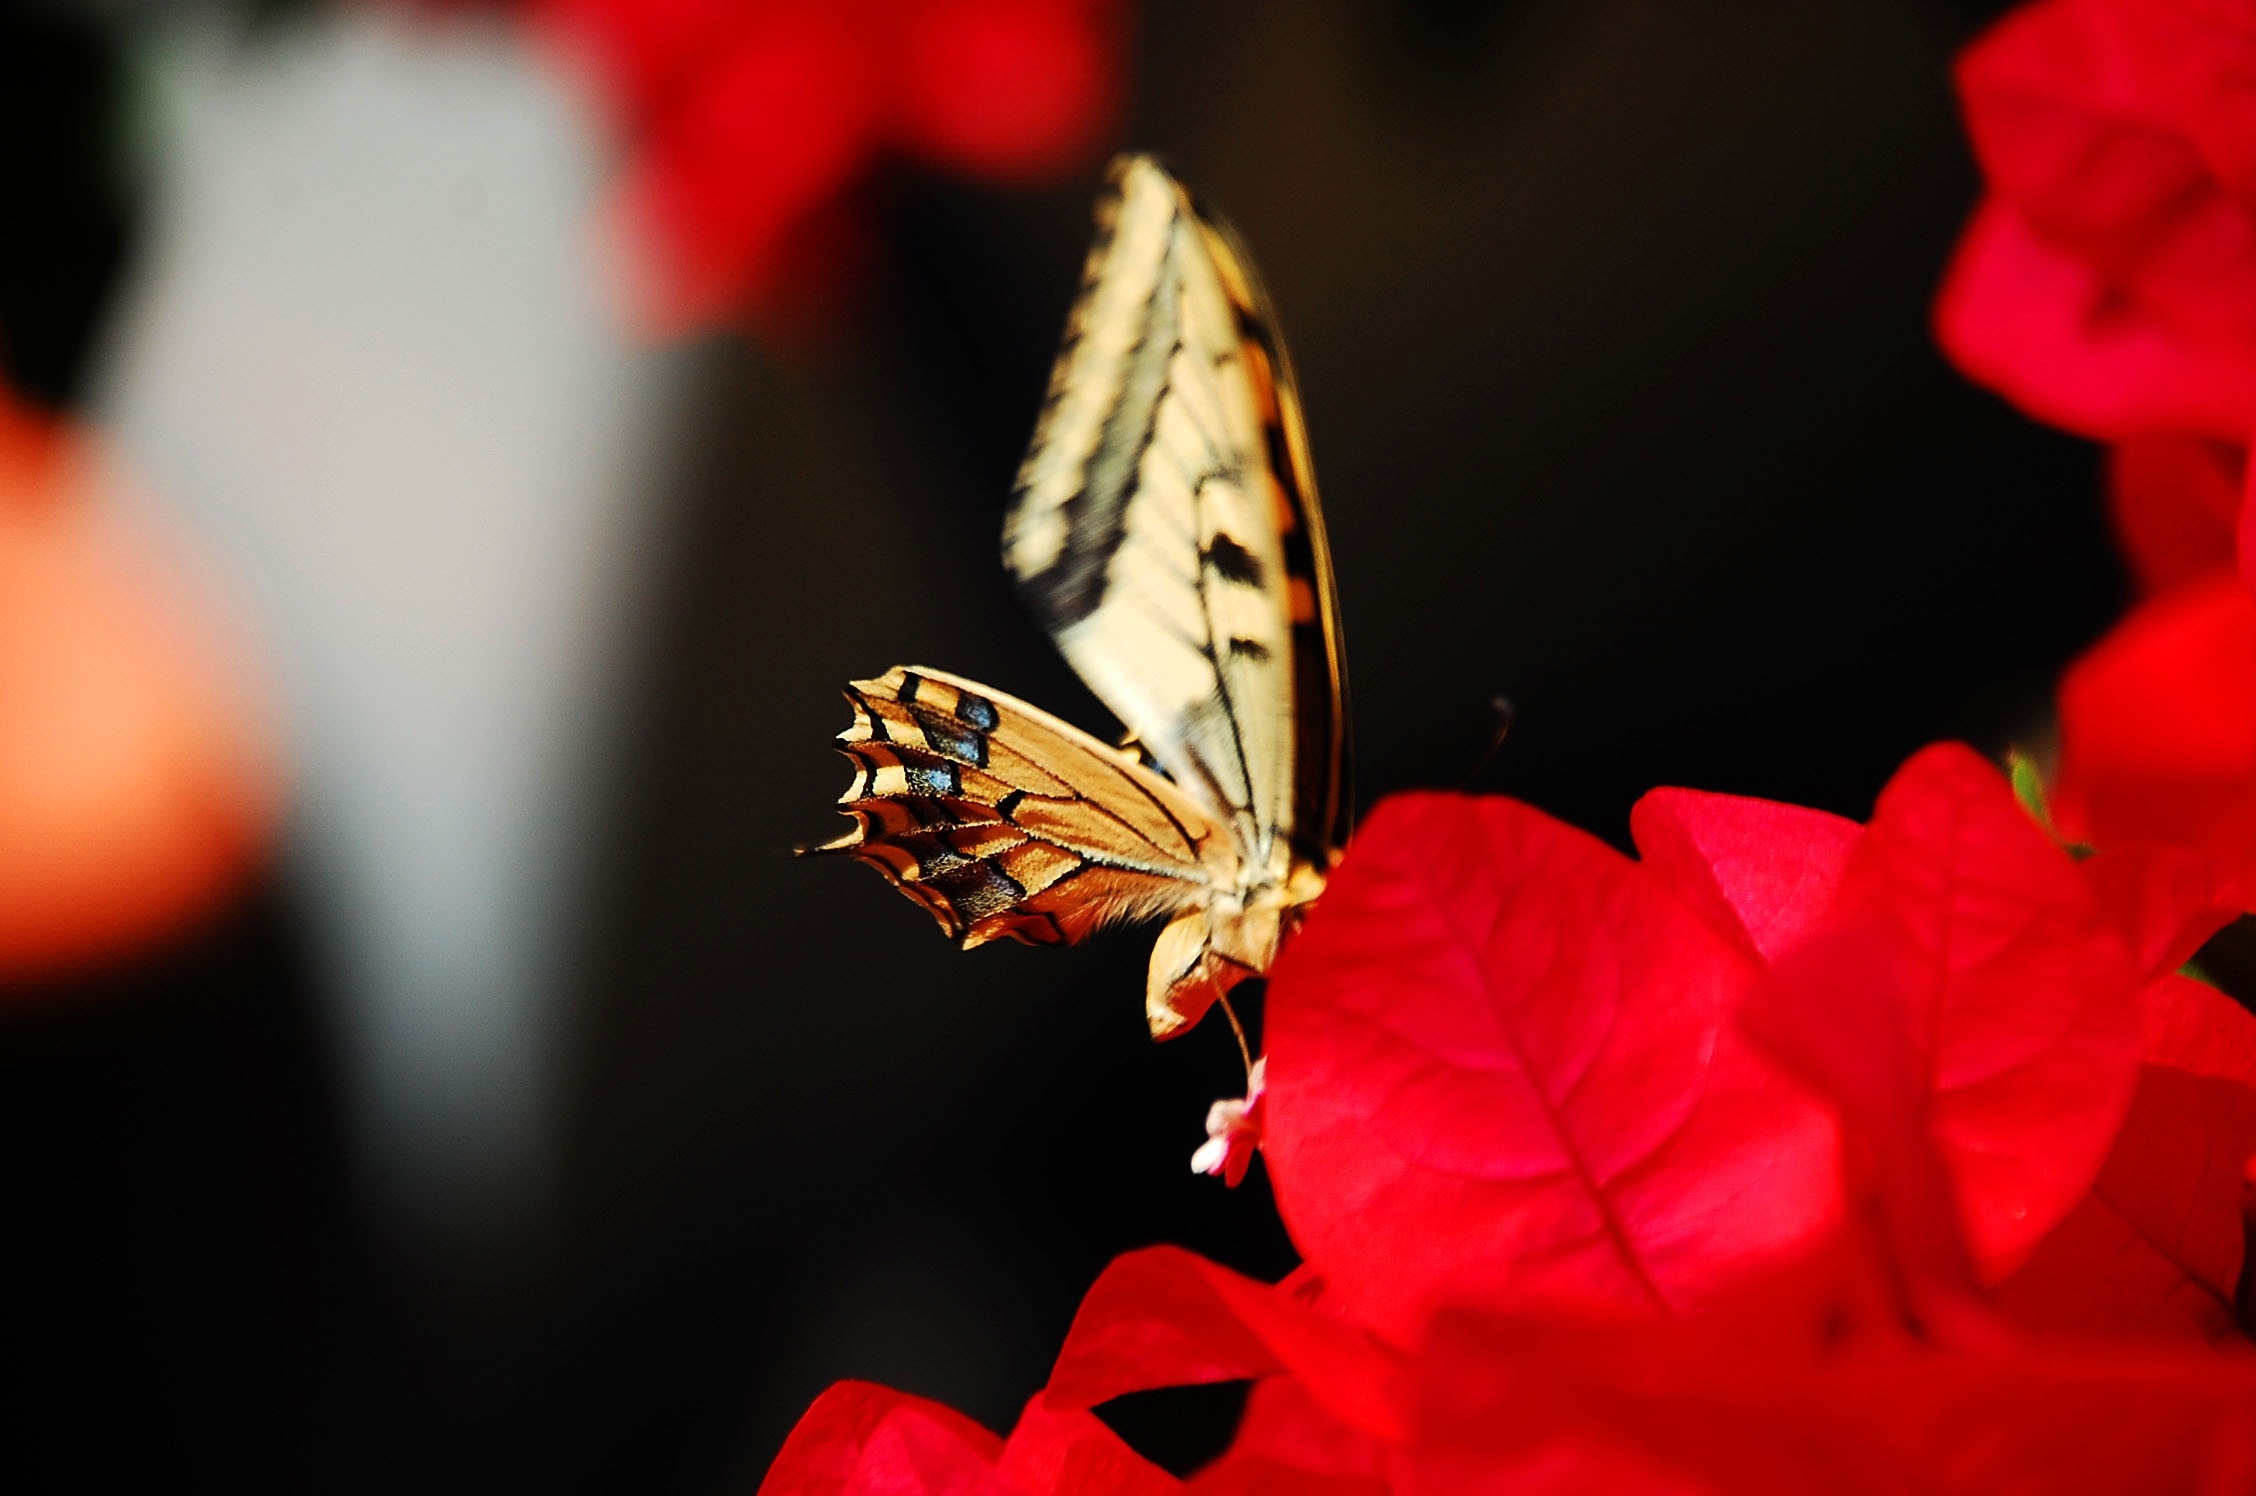 yellow winged butterfly perched at red petaled flower at daytime